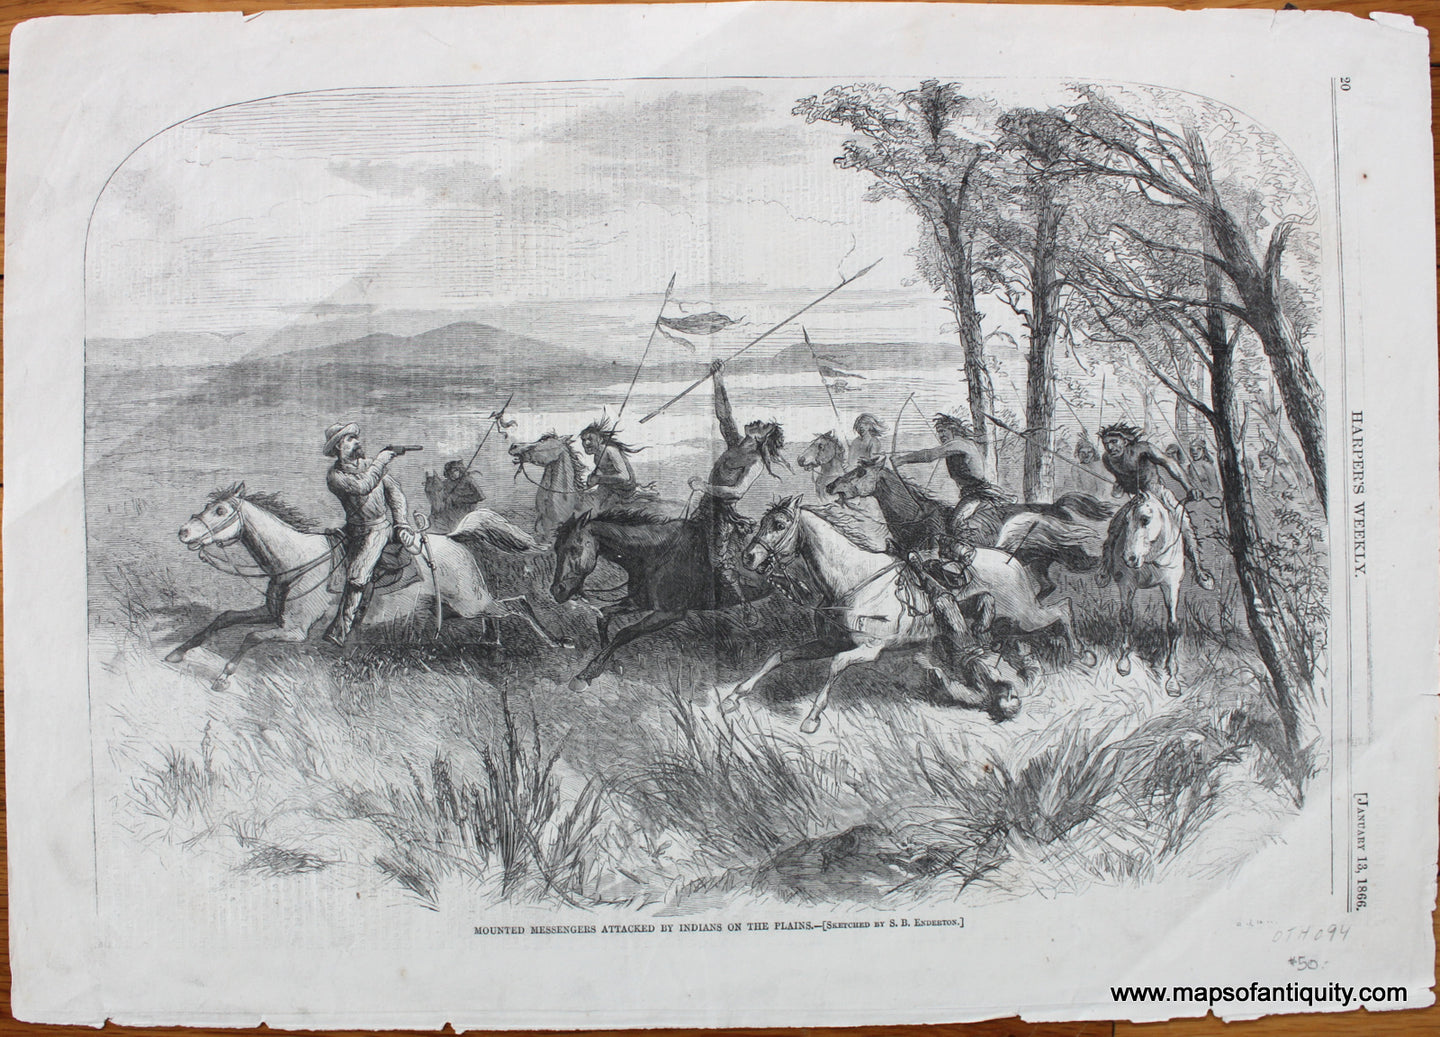 Antique-Black-and-White-Illustration-Mounted-Messengers-Attacked-by-Indians-on-the-Plains.-Historical-Prints--1866-Harper's-Weekly-Maps-Of-Antiquity